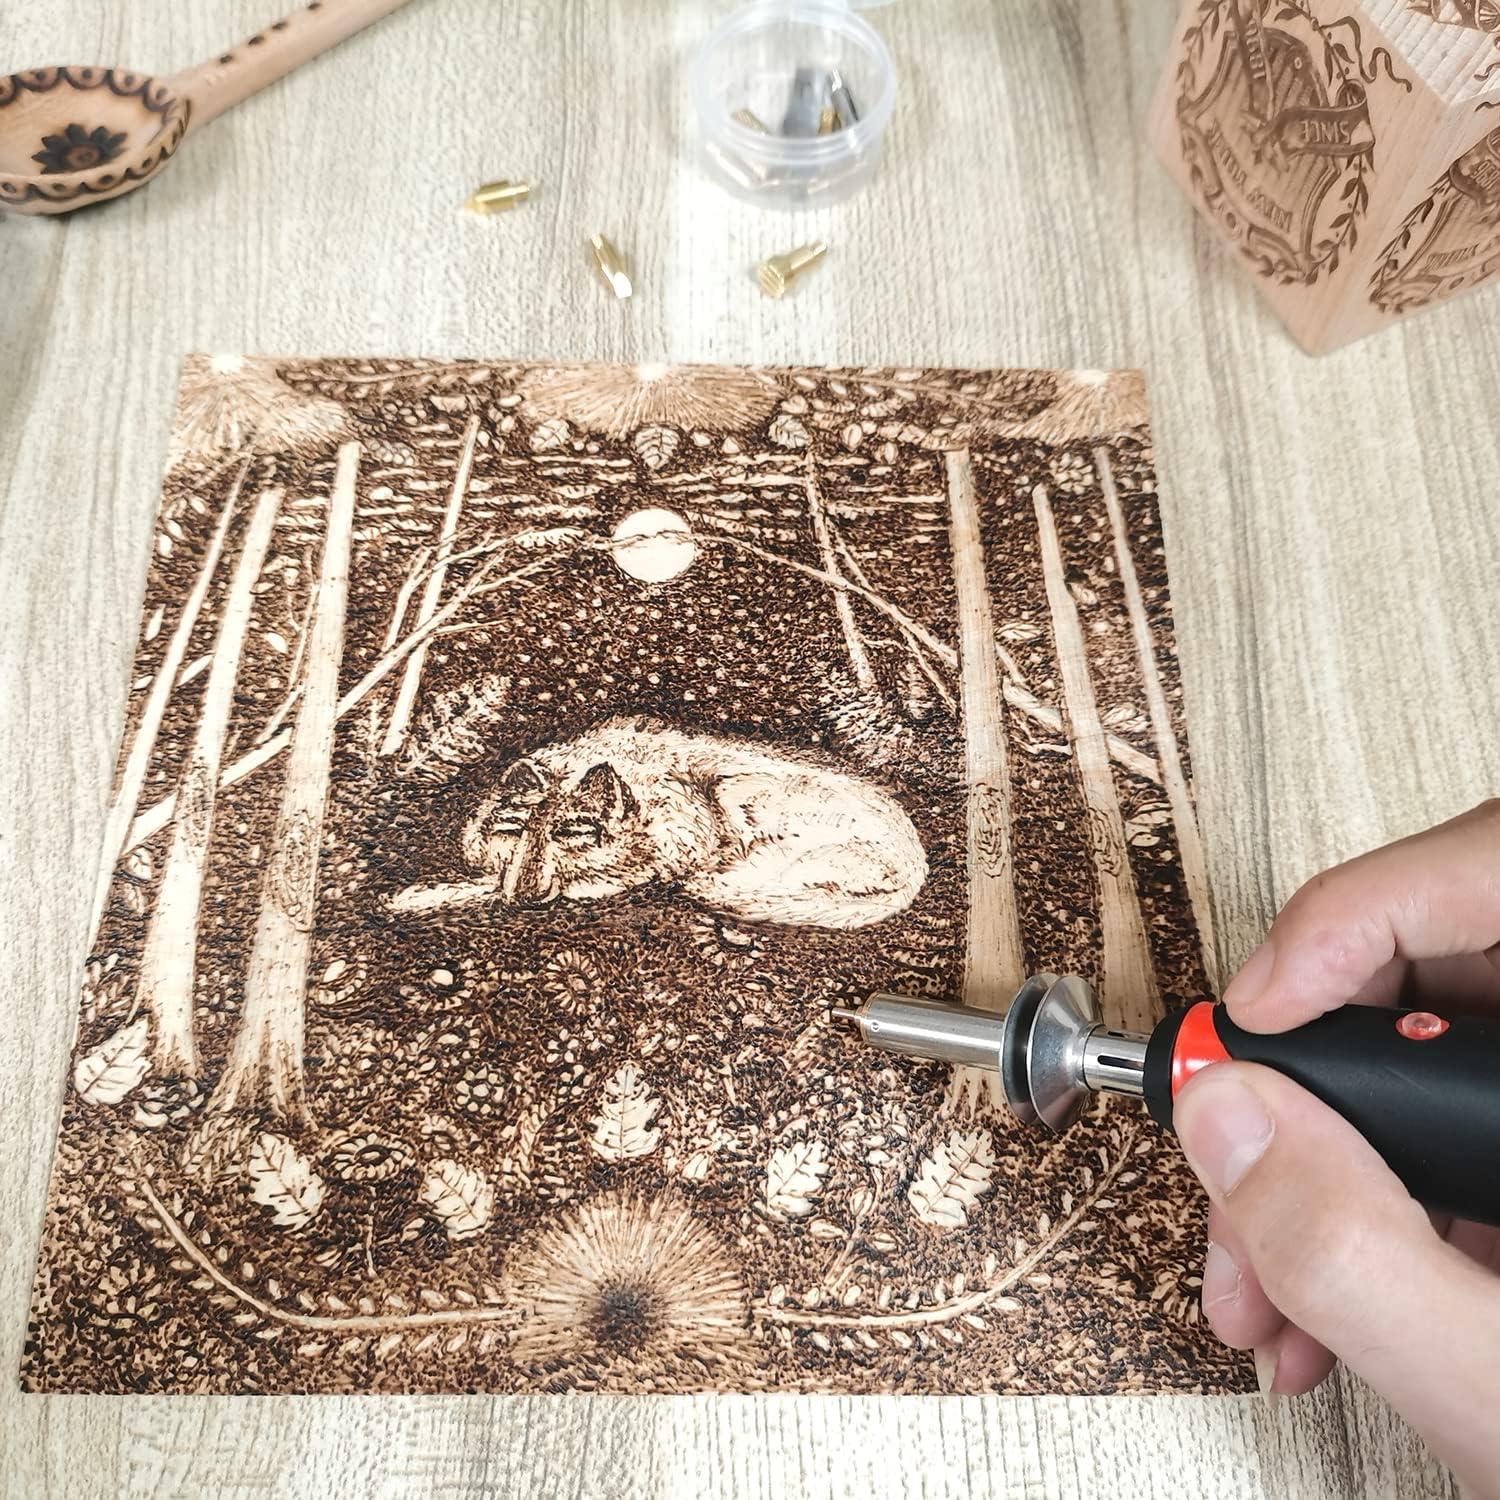 Wood Burning kit, Professional WoodBurning Pen Tool, DIY Creative Tools , Wood Burner for Embossing/Carving/Pyrography,Suitable for Beginners,Adults